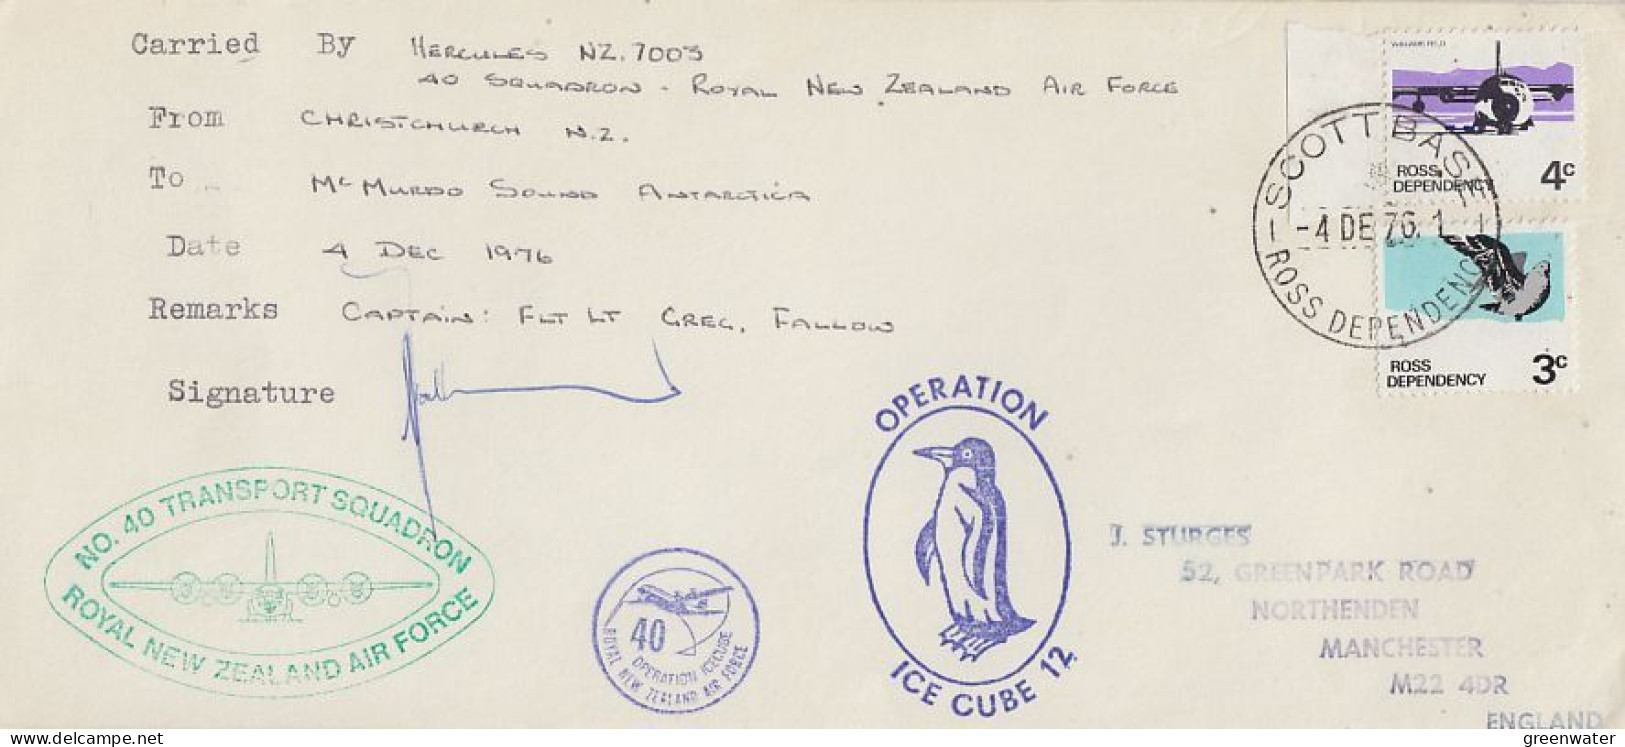 Ross Dependency Antarctic Flight From Christchurch To McMurdo 4 DEC 1976  (RO200) - Lettres & Documents